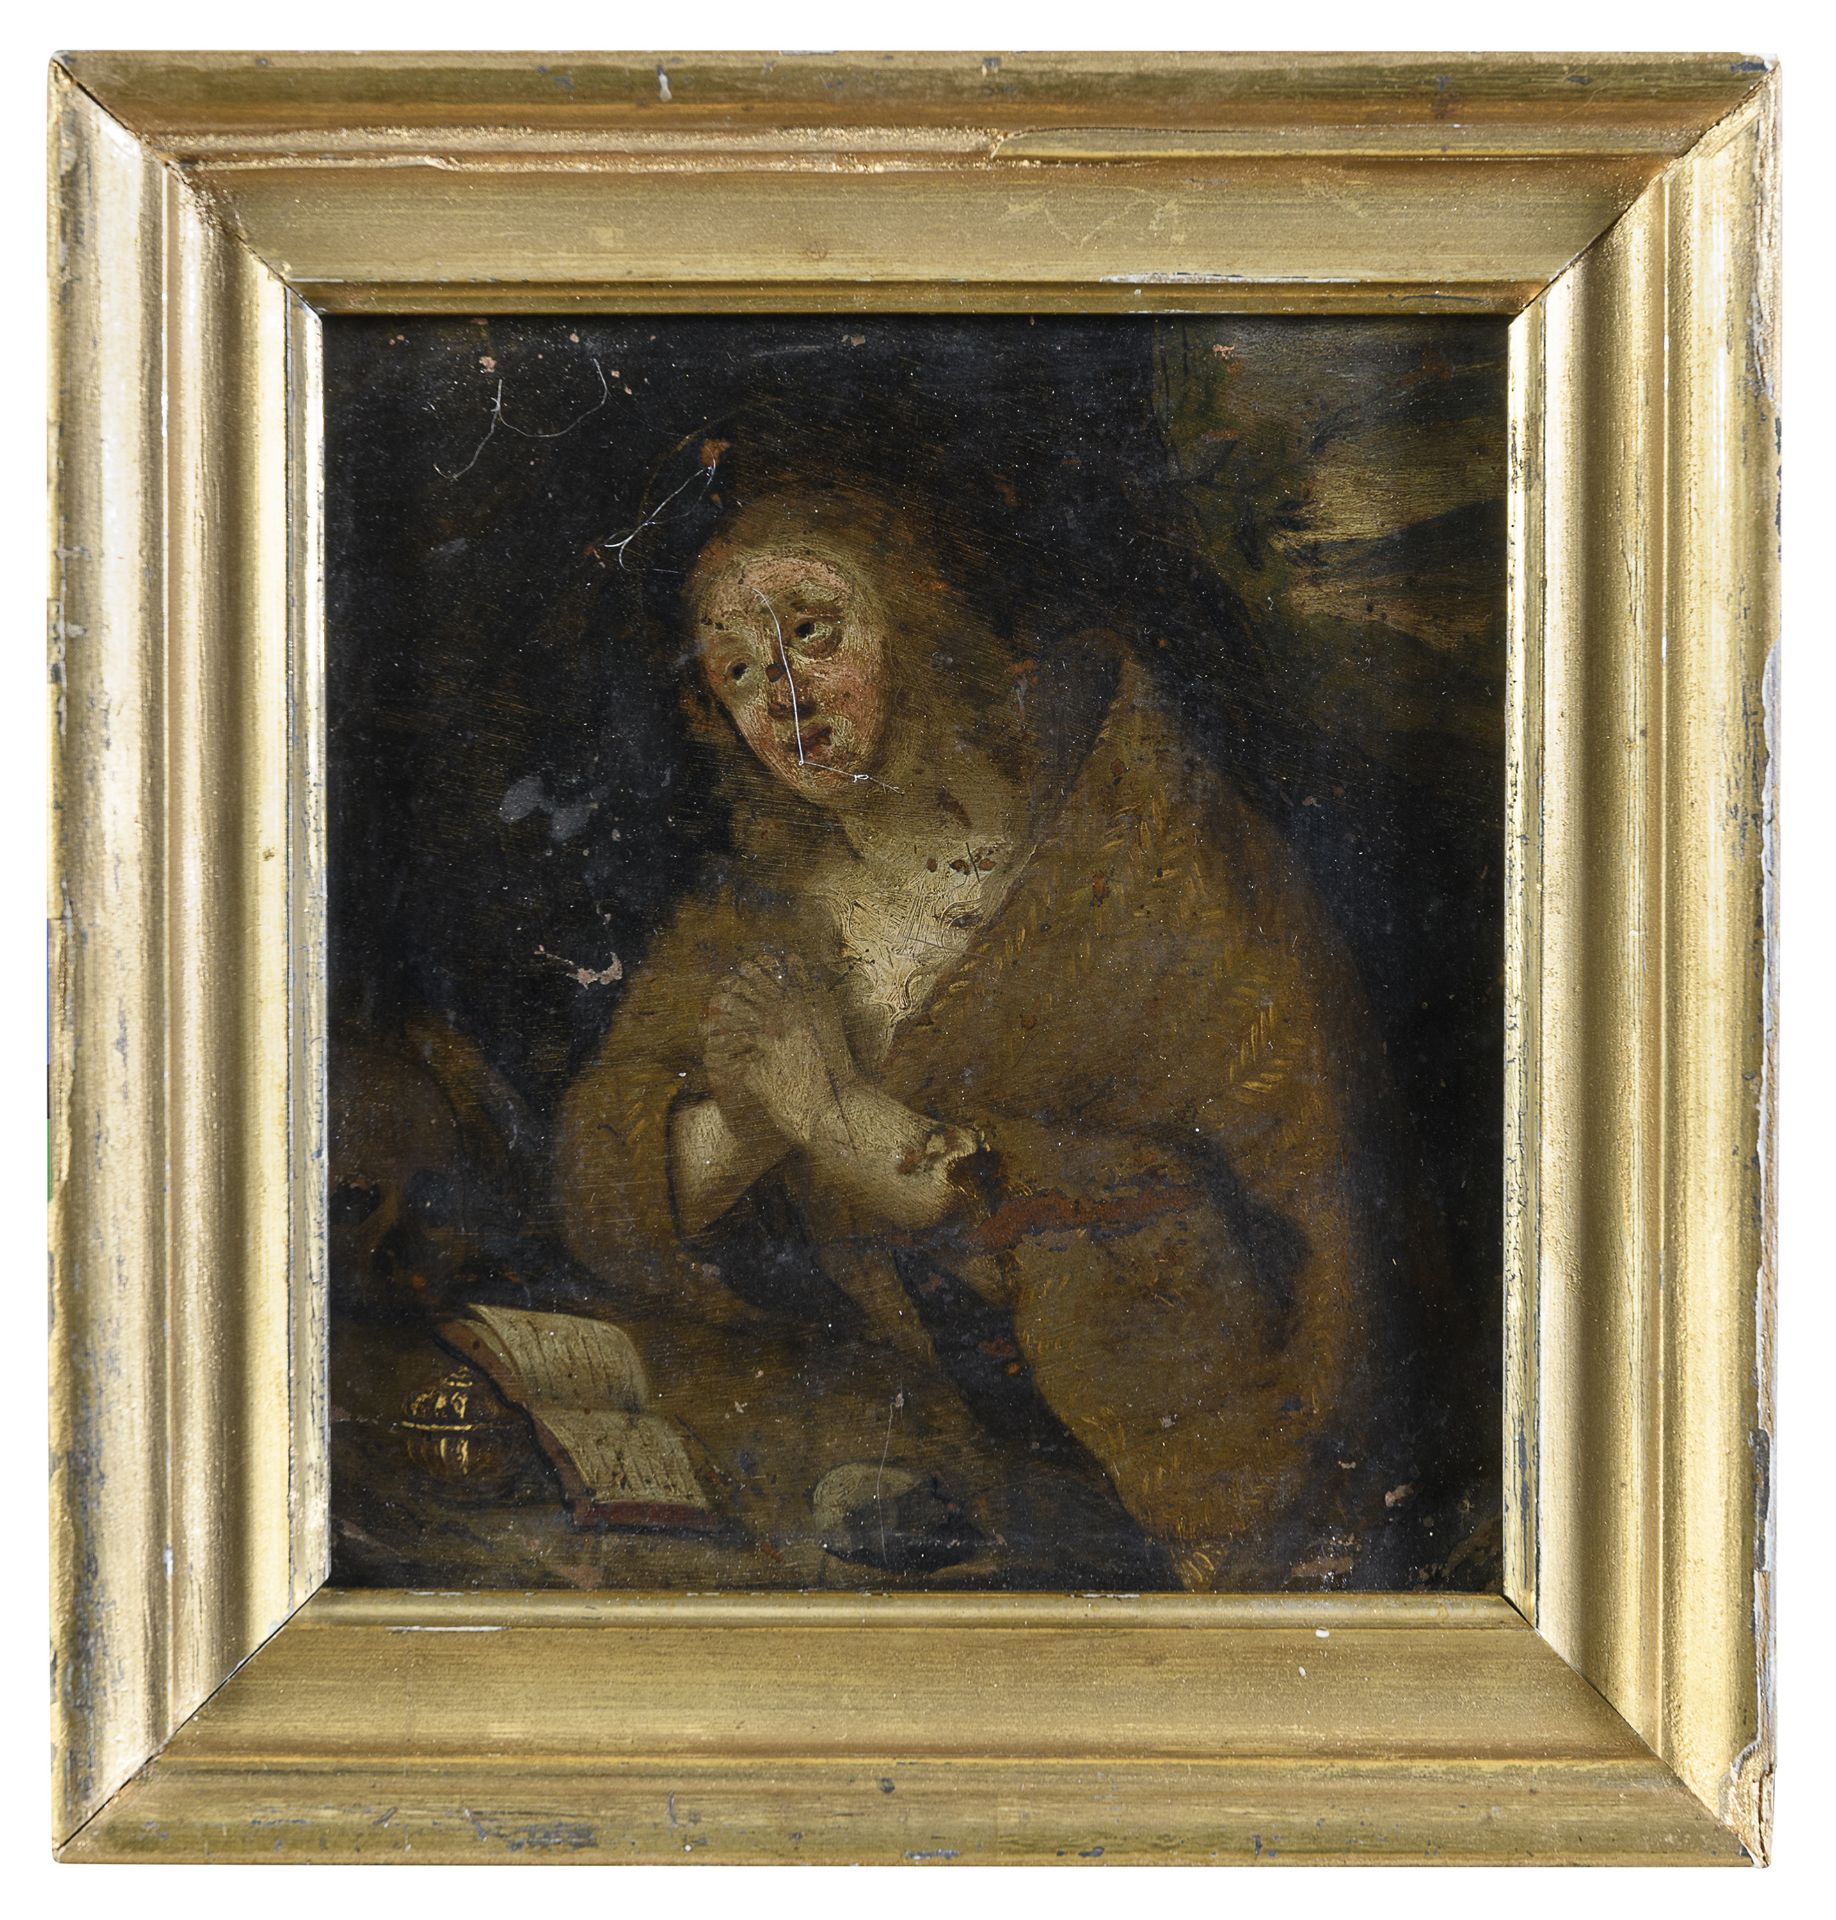 OIL PAINTING BY FLEMISH PAINTER ACTIVE IN ITALY EARLY 17TH CENTURY